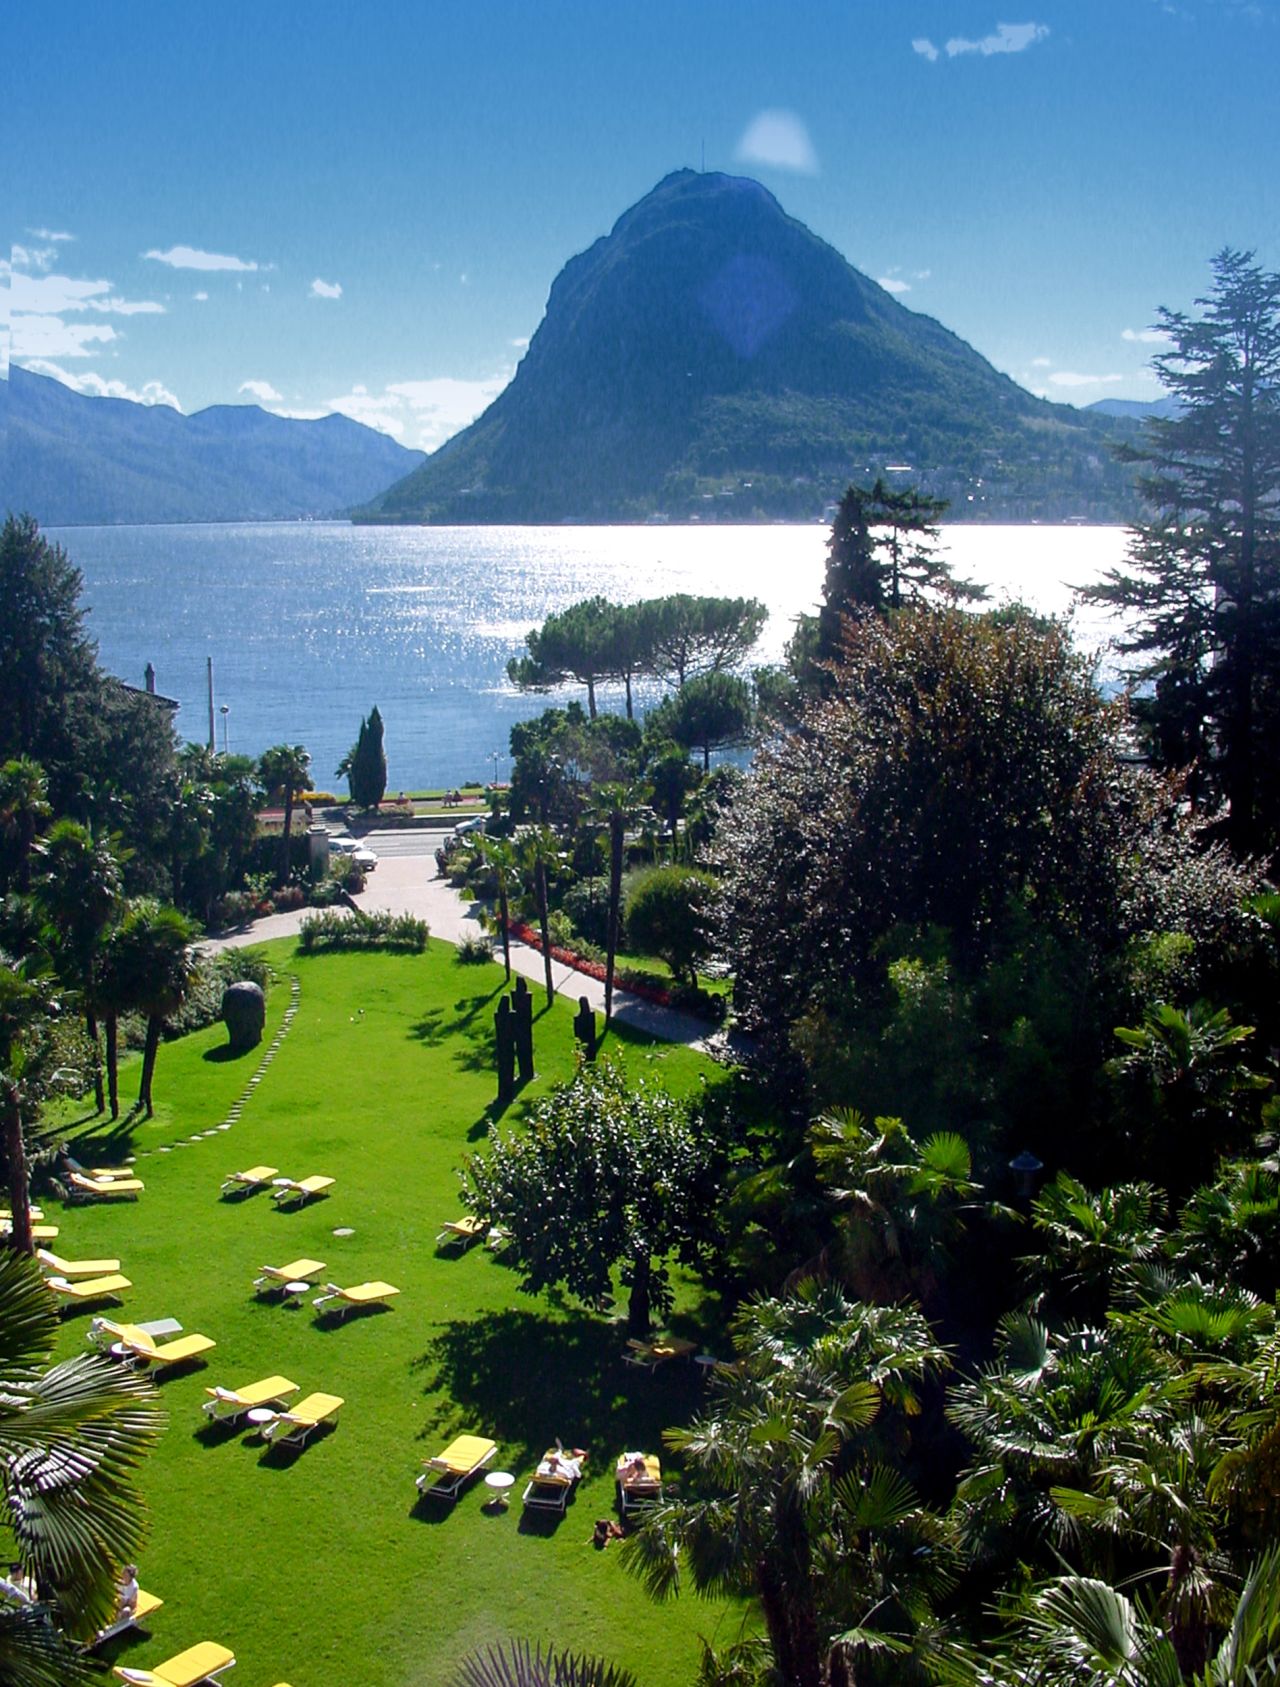 Italian in spirit but Swiss in name, Ticino presents travelers with politeness, white-glove service, sunbathing elites and an opportunity to stay in Villa Castagnola, a former residence of the czars. 